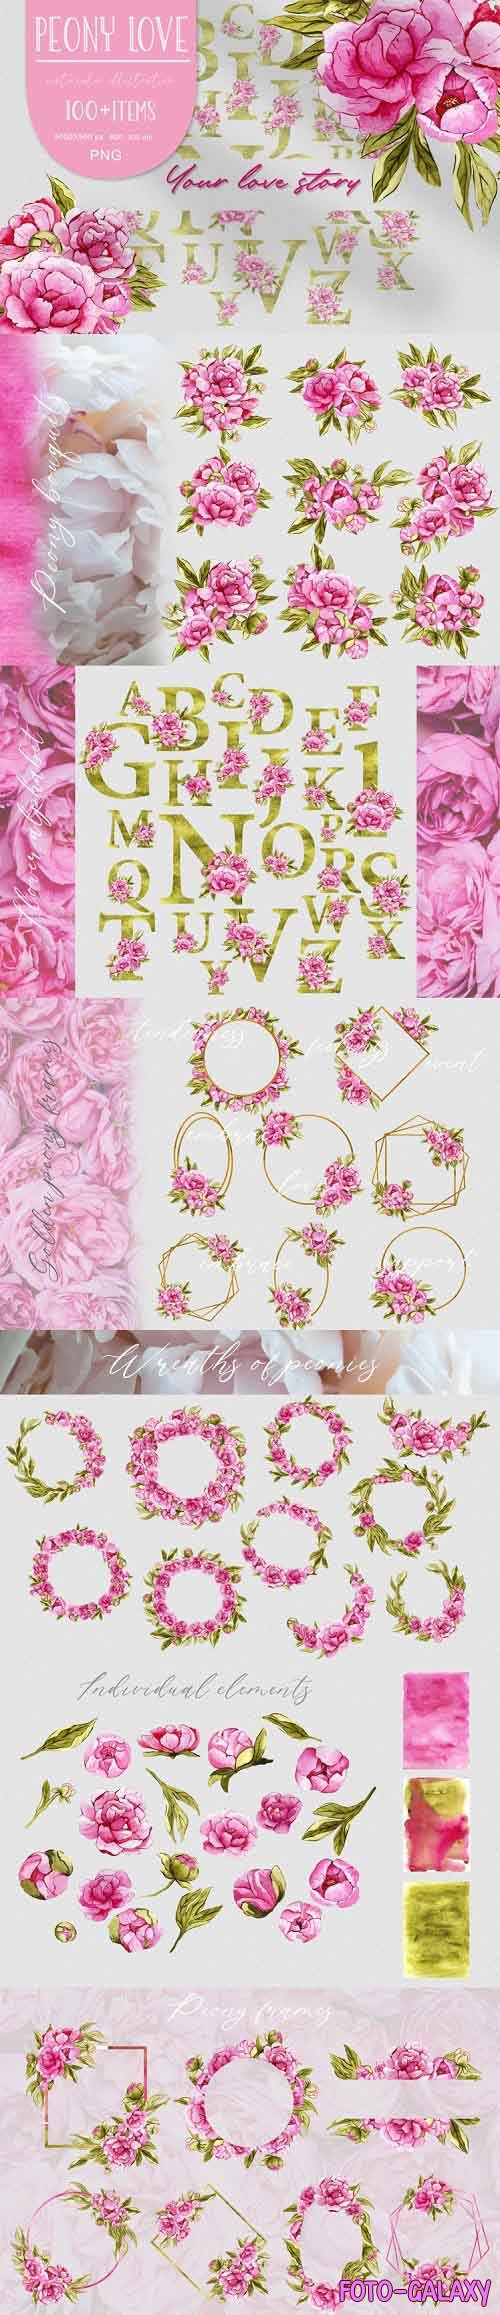 Watercolor floral set pink peony PNG - 974310